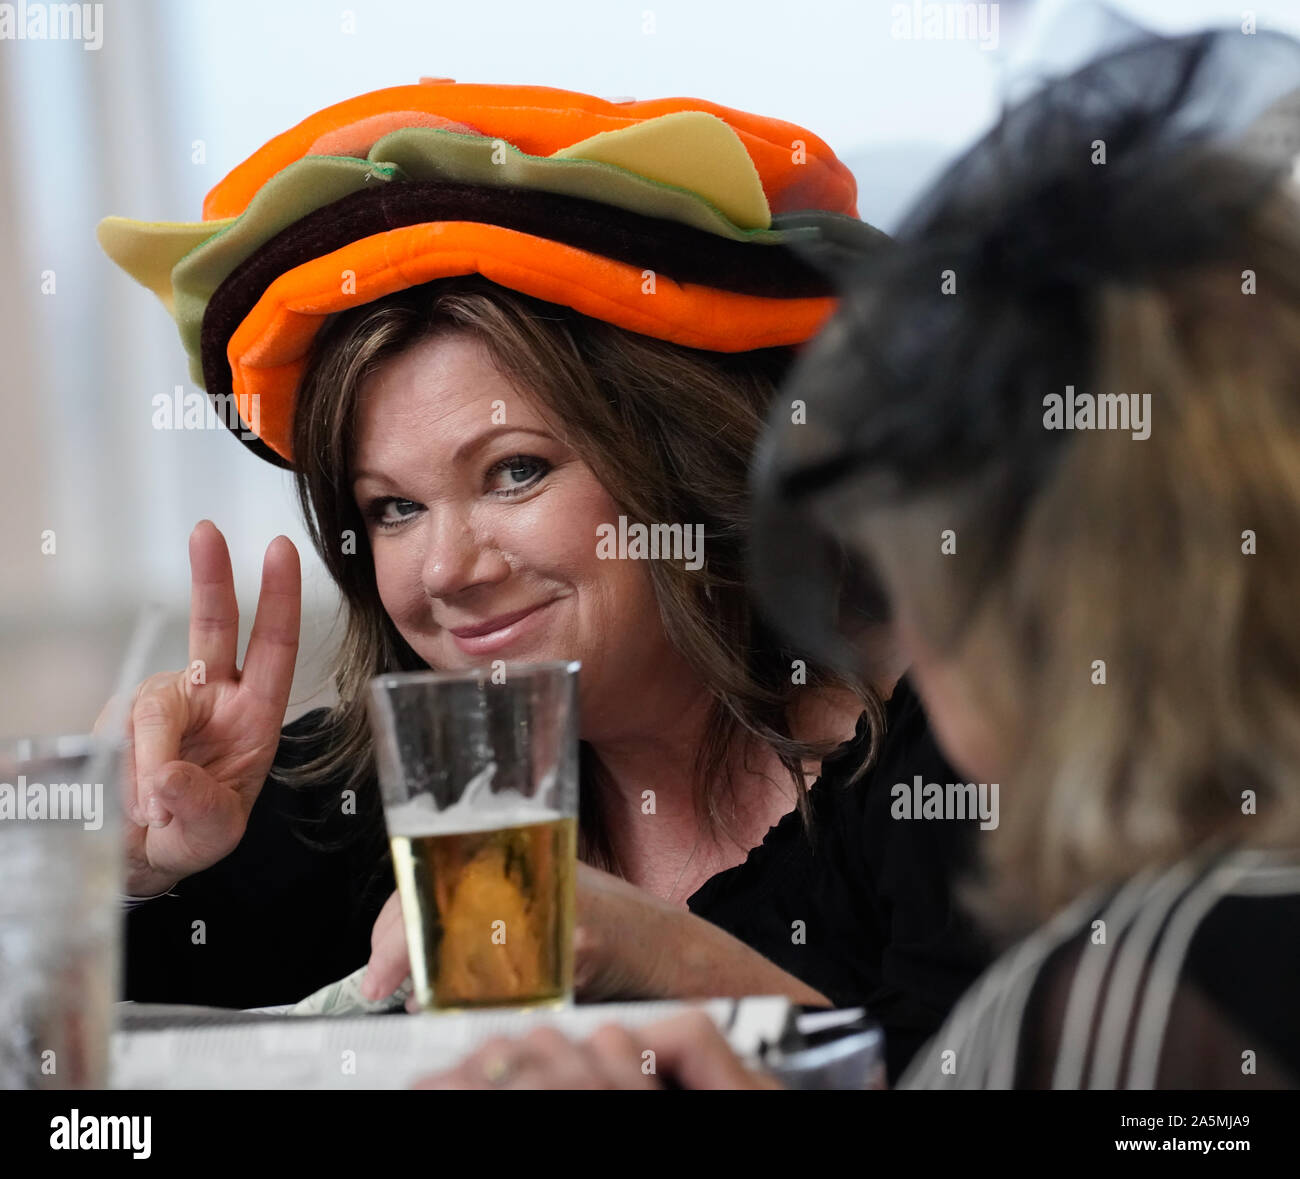 A woman in a very colorful hat enjoys a beer at the bar during Ladies Day at Arizona Downs, Prescott Valley, Arizona on August 10, 2019. Stock Photo